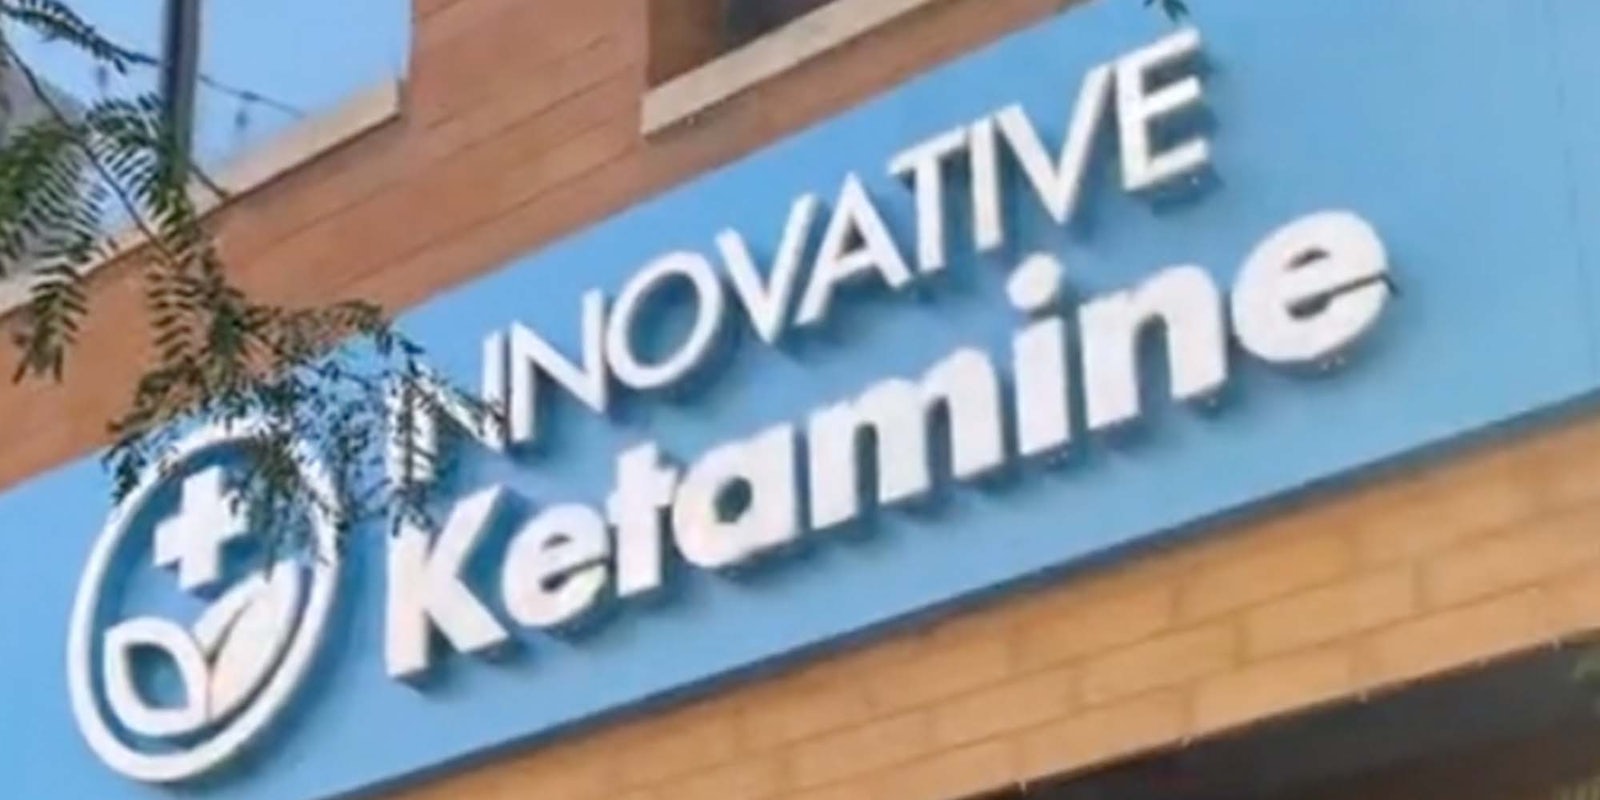 A TikTok calls out ketamine being used for medical purposes.